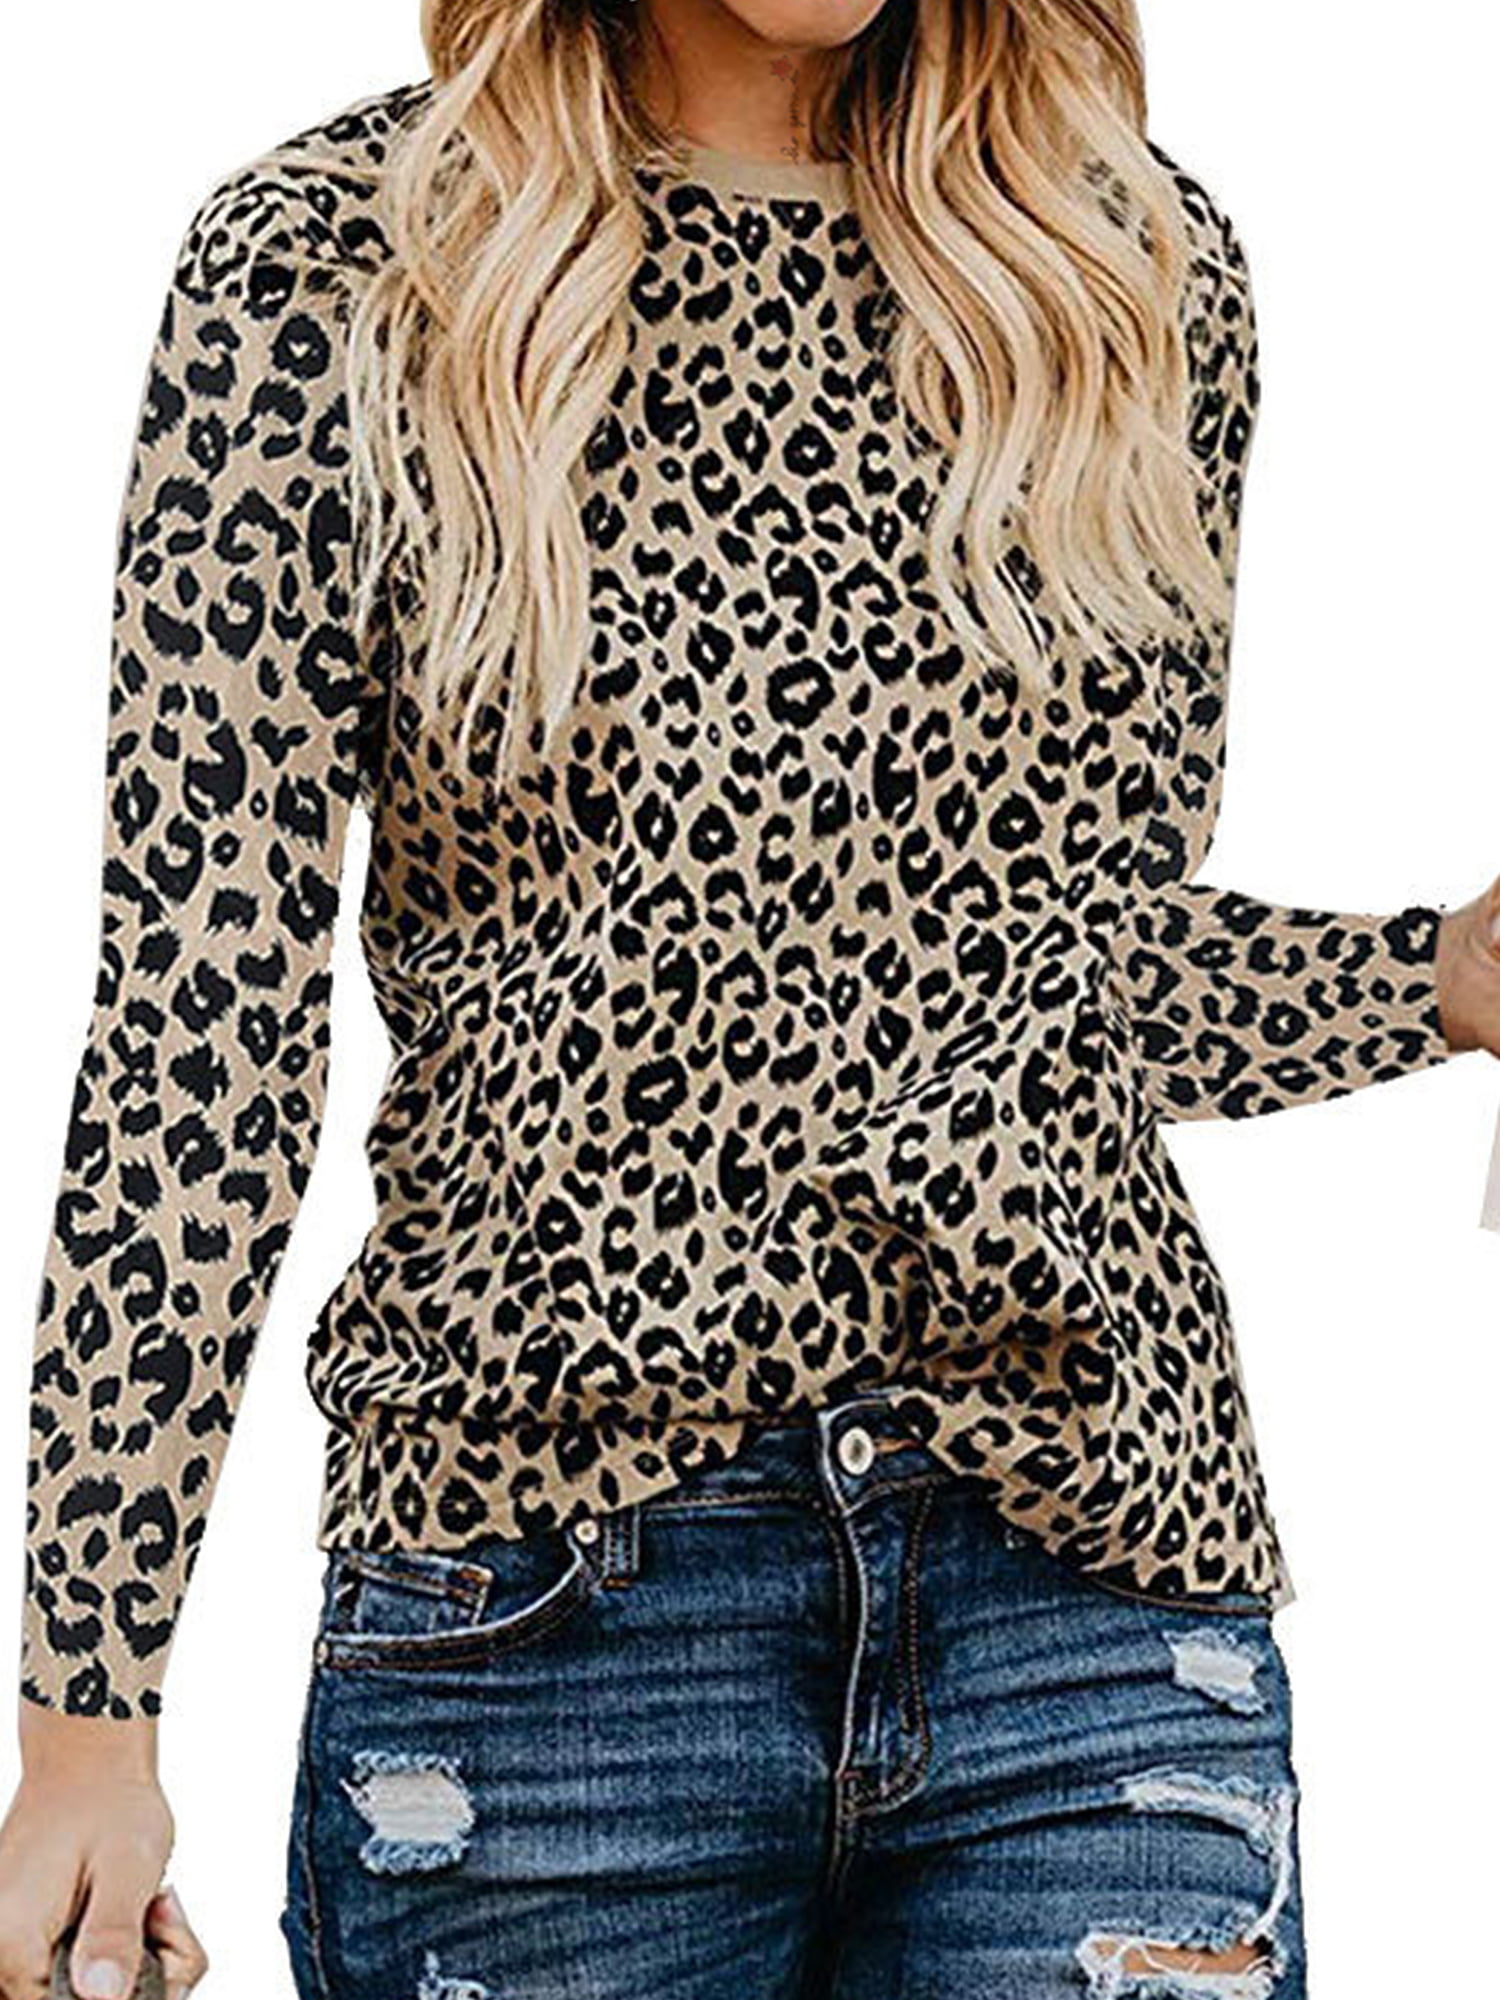 UK Womens Summer Tops Leopard T Shirt Blouse Ladies Casual Loose Tee Plus Size